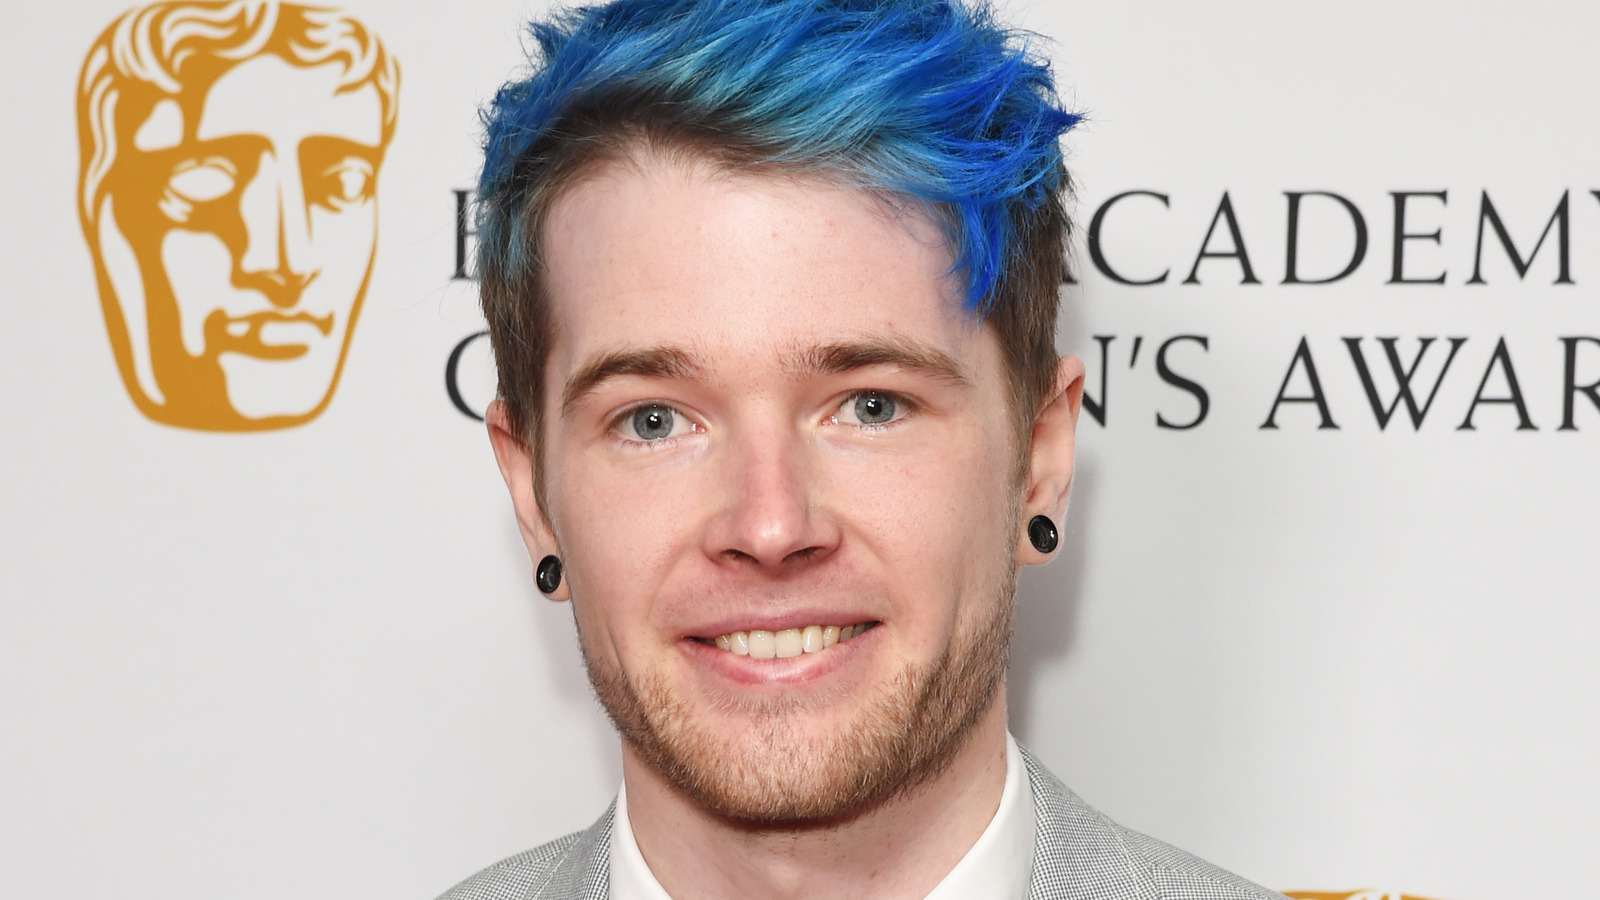 2. "Dantdm's Latest Videos Without Blue Hair" - wide 1